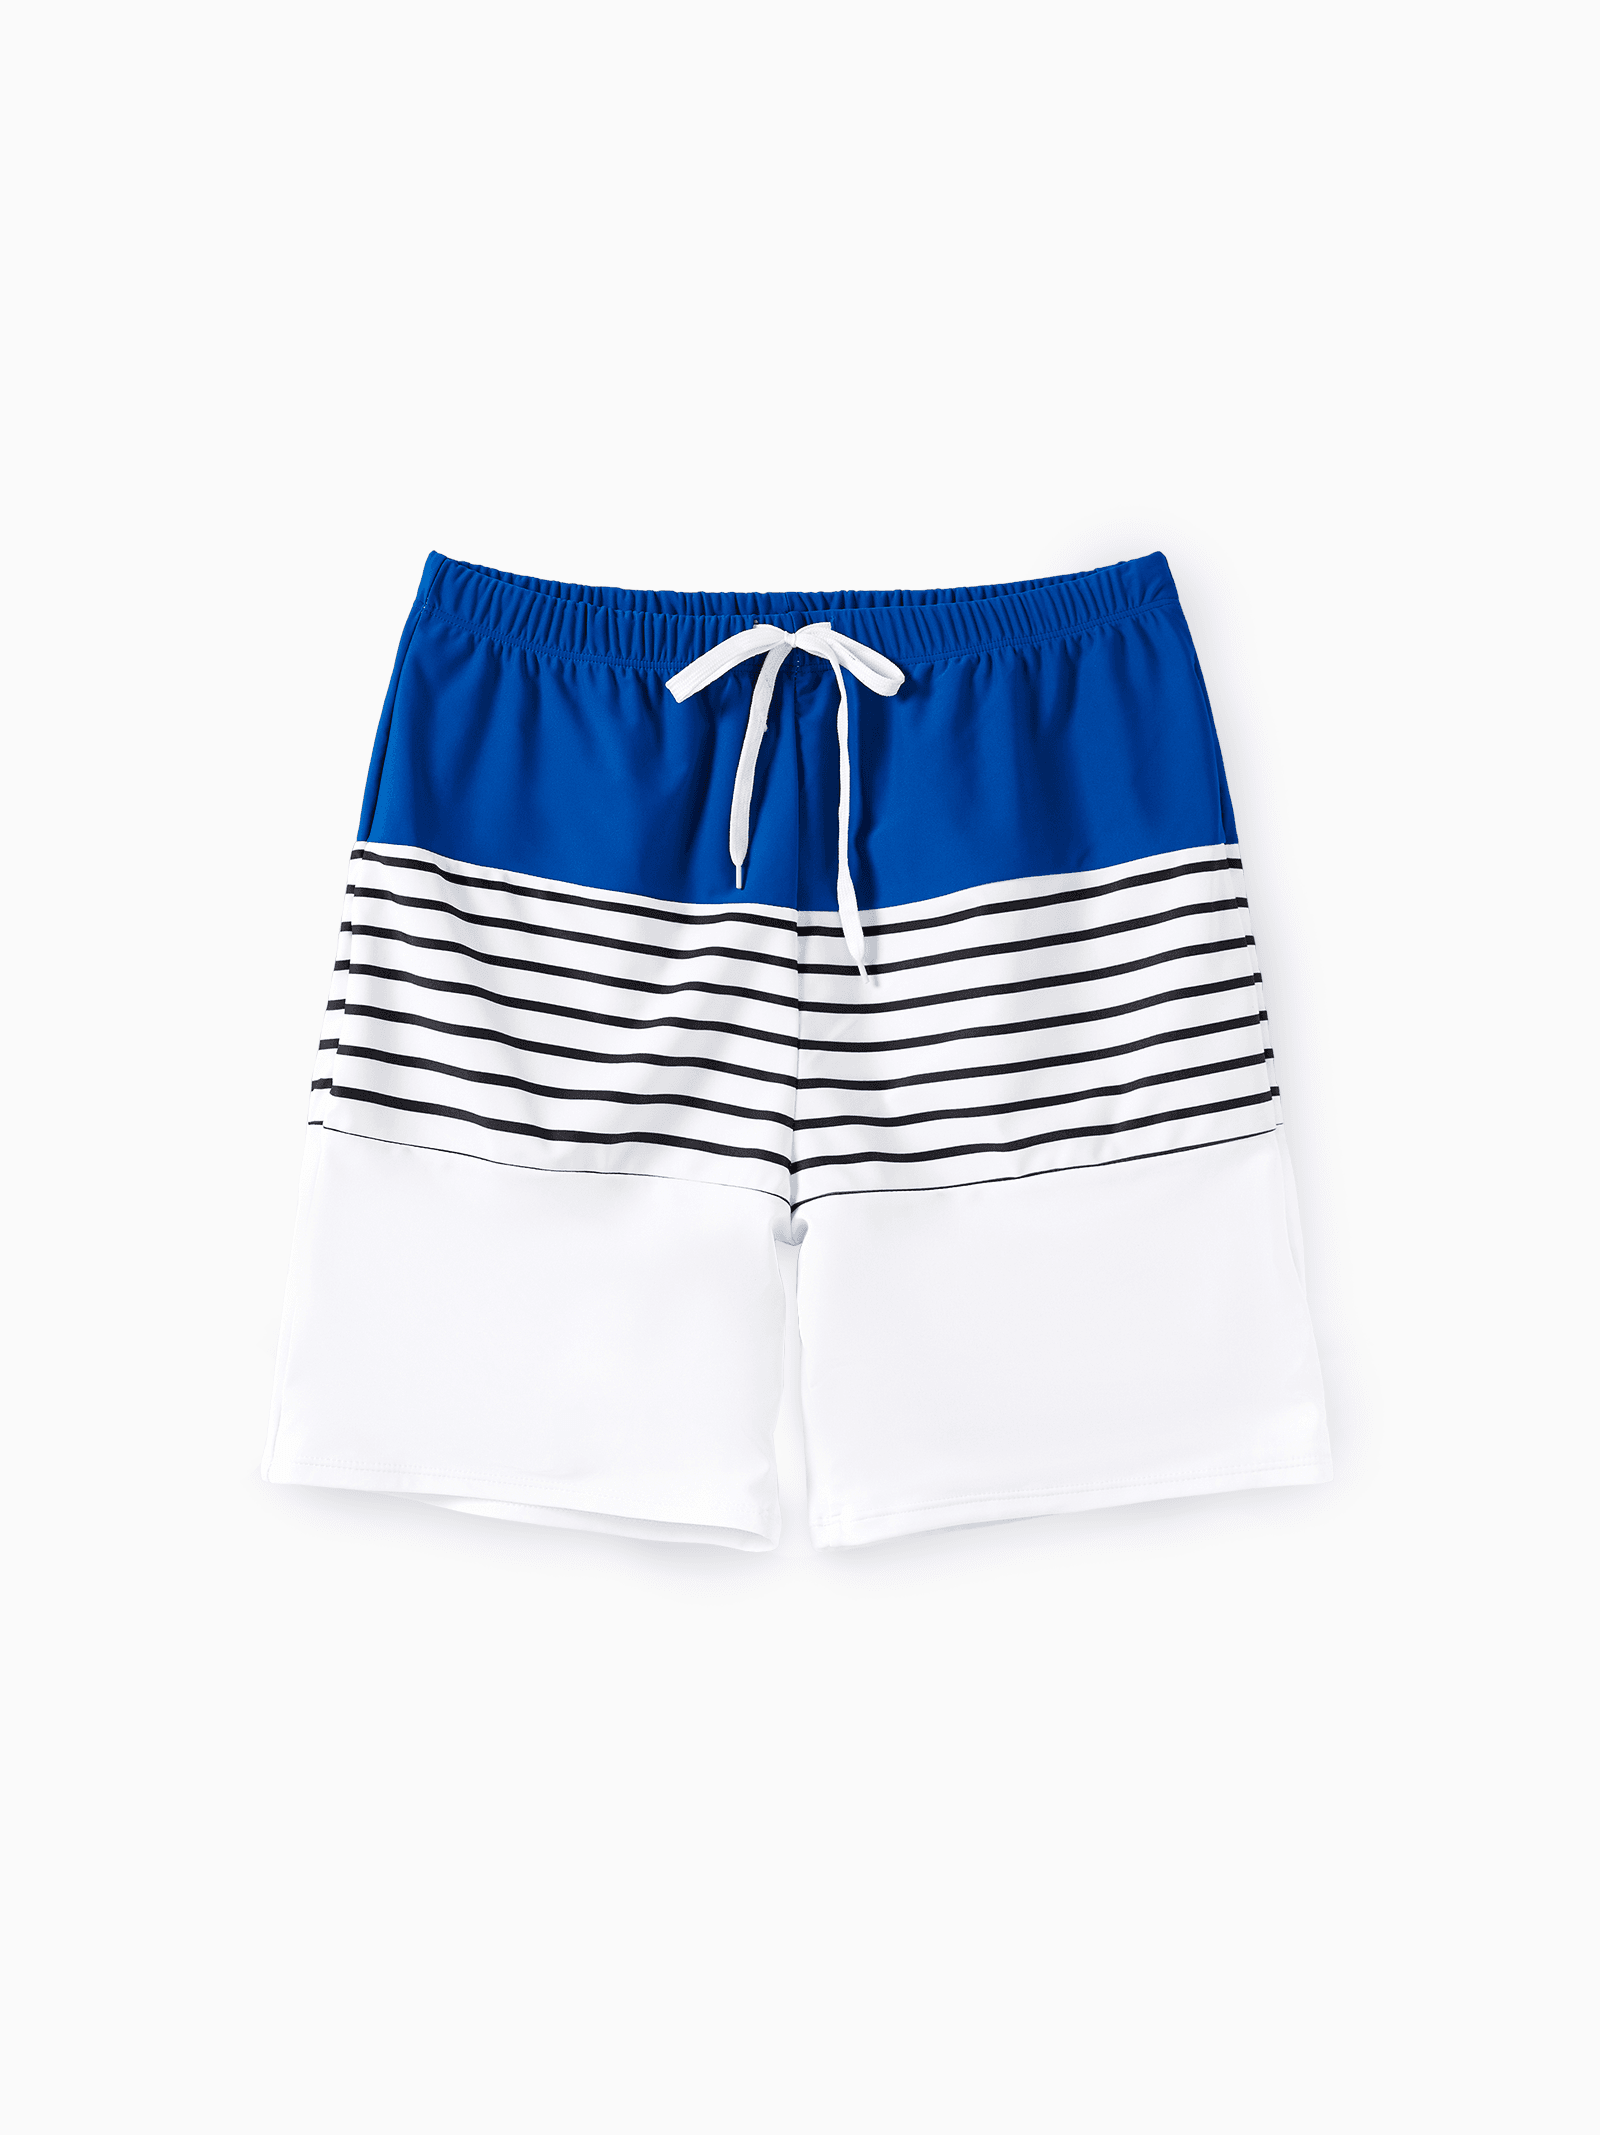 

Matching Family Swimsuit Colorblock Drawstring Swim Trunks or Striped Blue Spliced Tankini with Cross-Front, Tie-Back, and Thin Straps